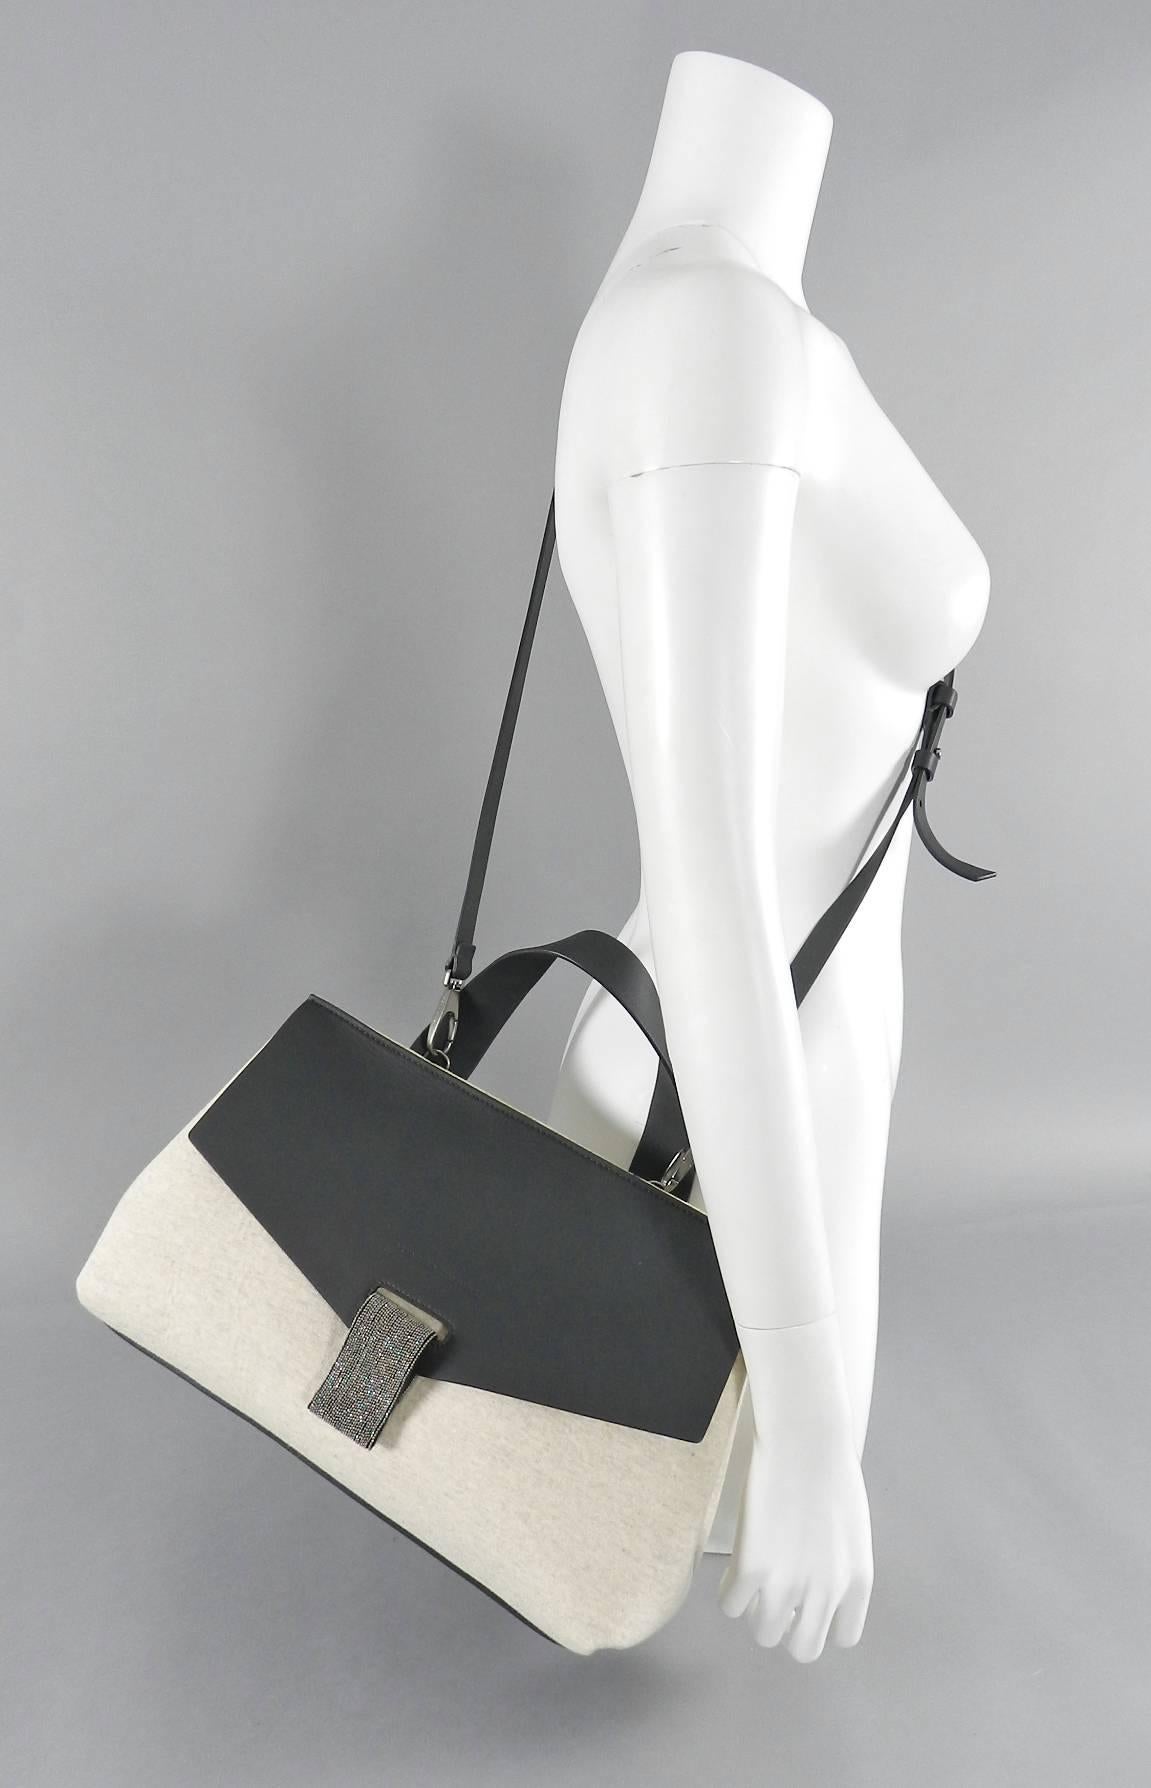 Brunello Cucinelli Dark Charcoal Grey and Cashmere Bag Purse. $2650 retail.  Body of bag measures about 13.5 x 8.5 x 6.5